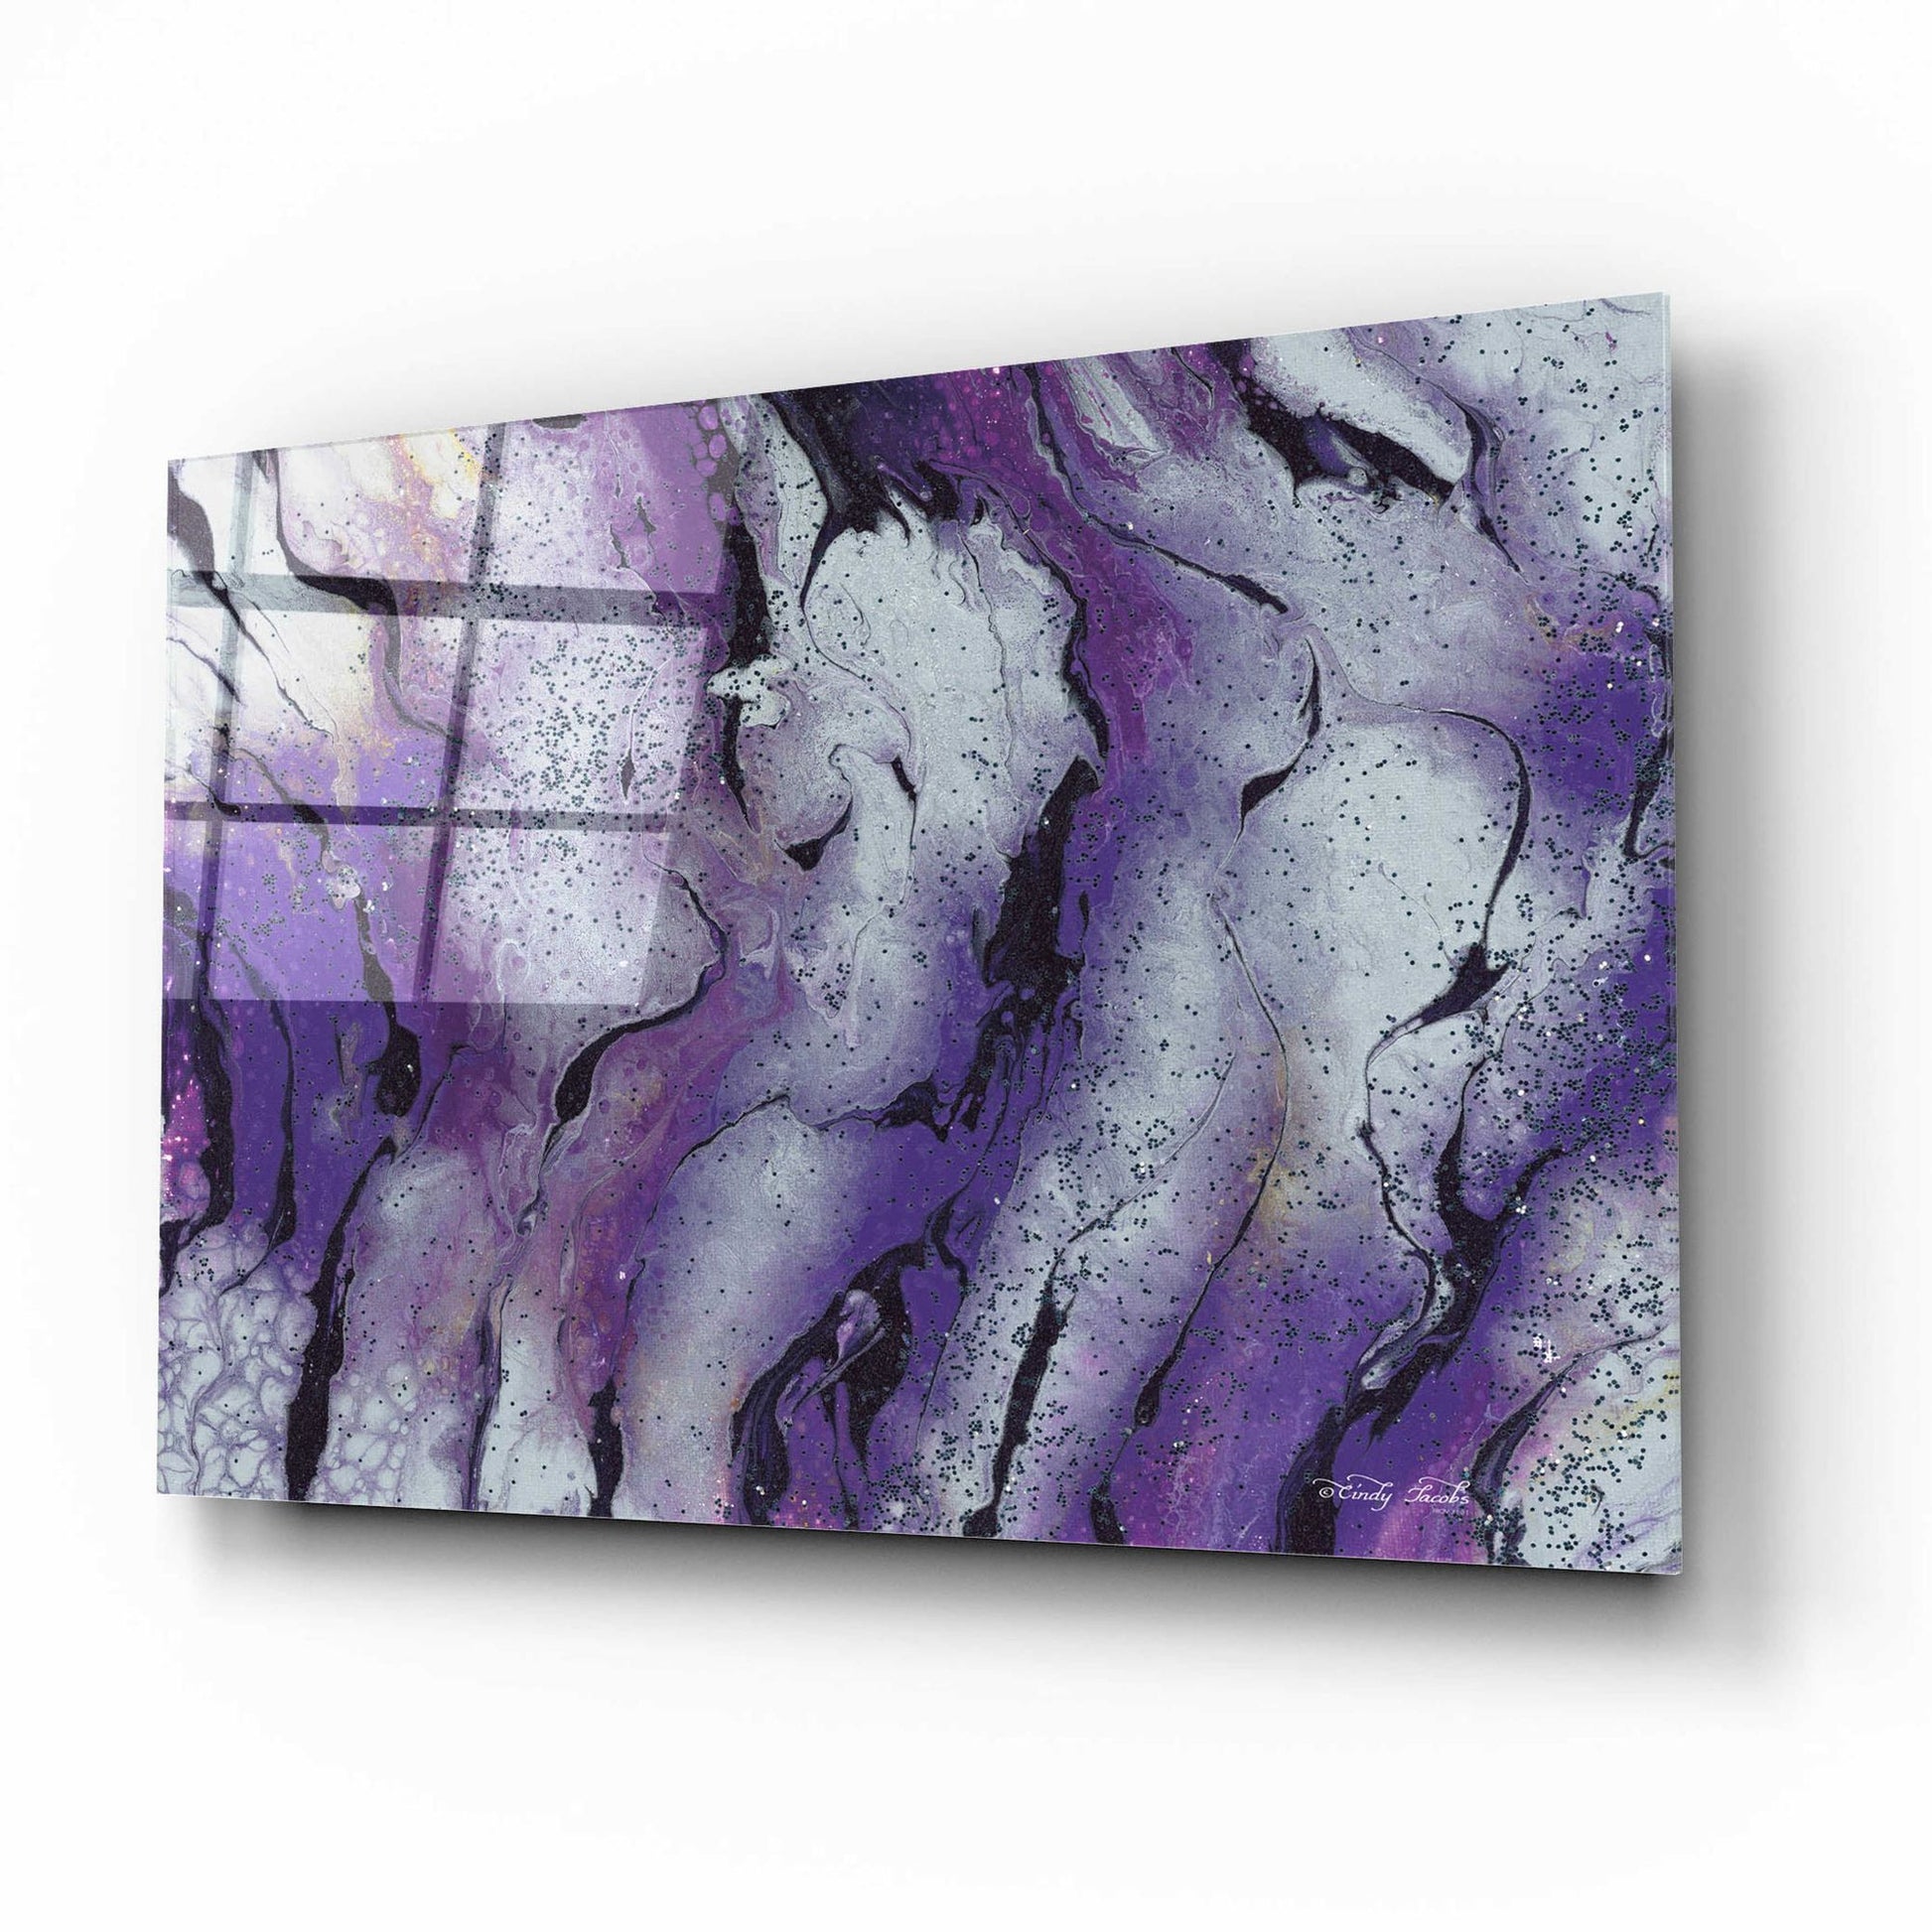 Epic Art 'Abstract in Purple III' by Cindy Jacobs, Acrylic Glass Wall Art,16x12